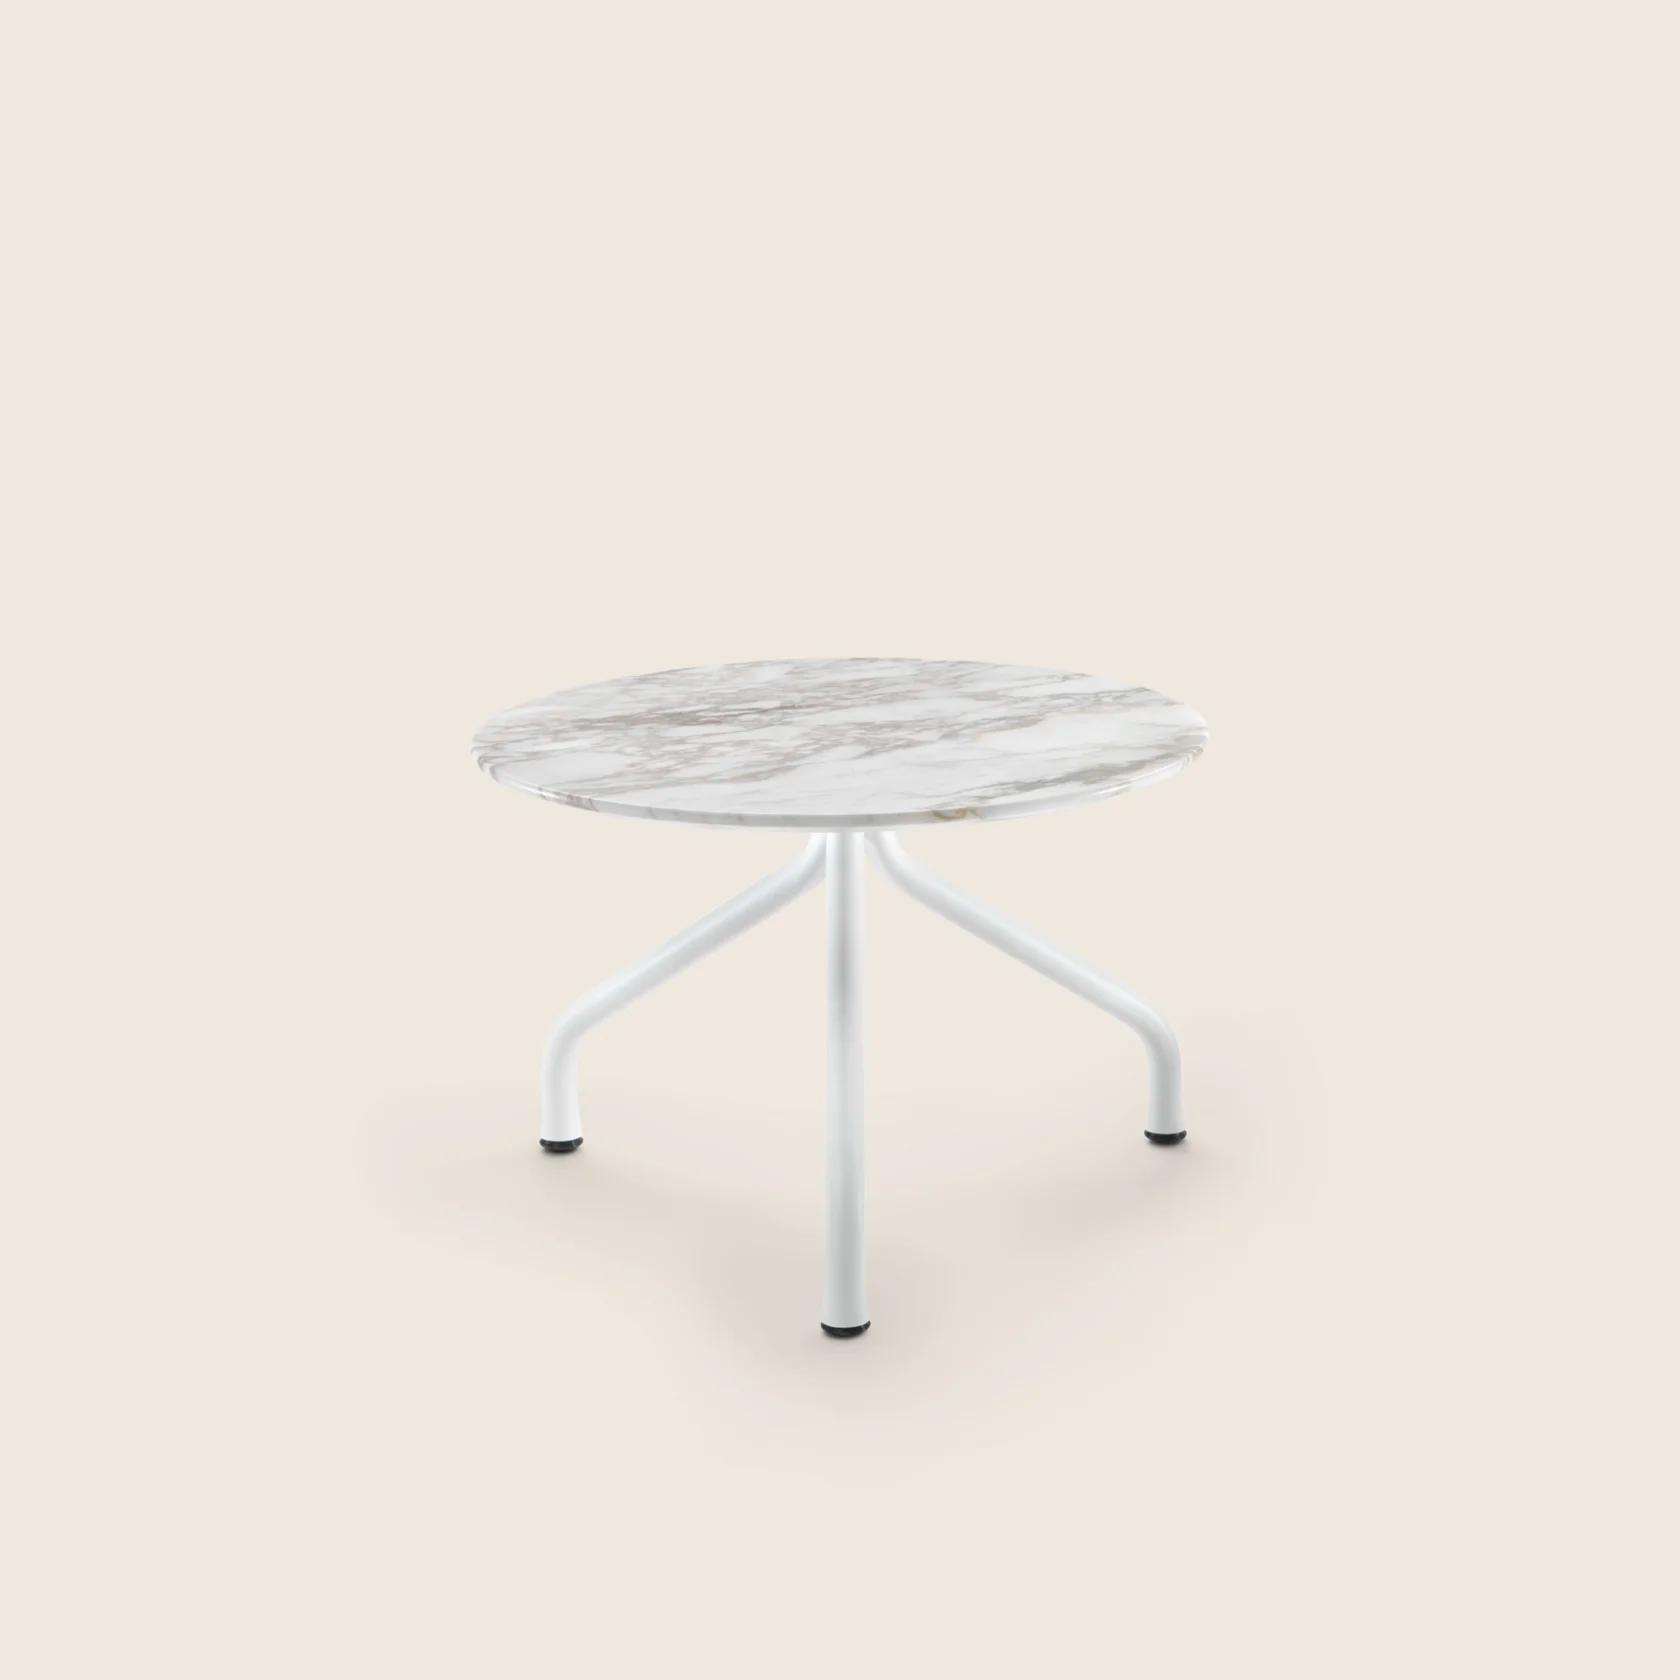 02A160_ACADEMY_COFFEETABLE_02.png